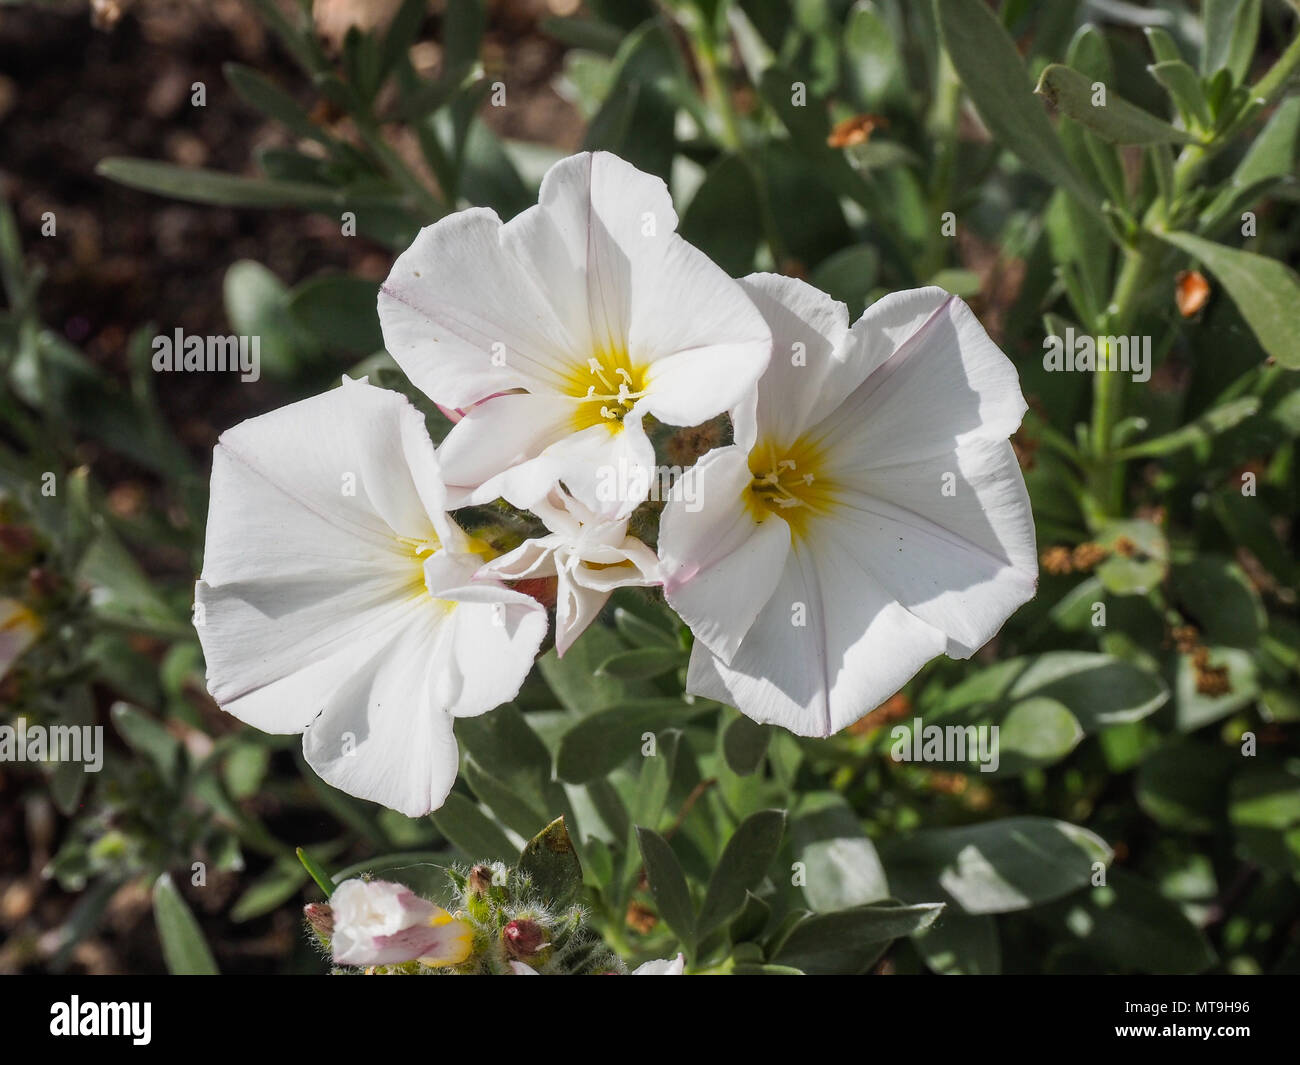 A close up of the white flowers of Convolvulus cneorum Stock Photo